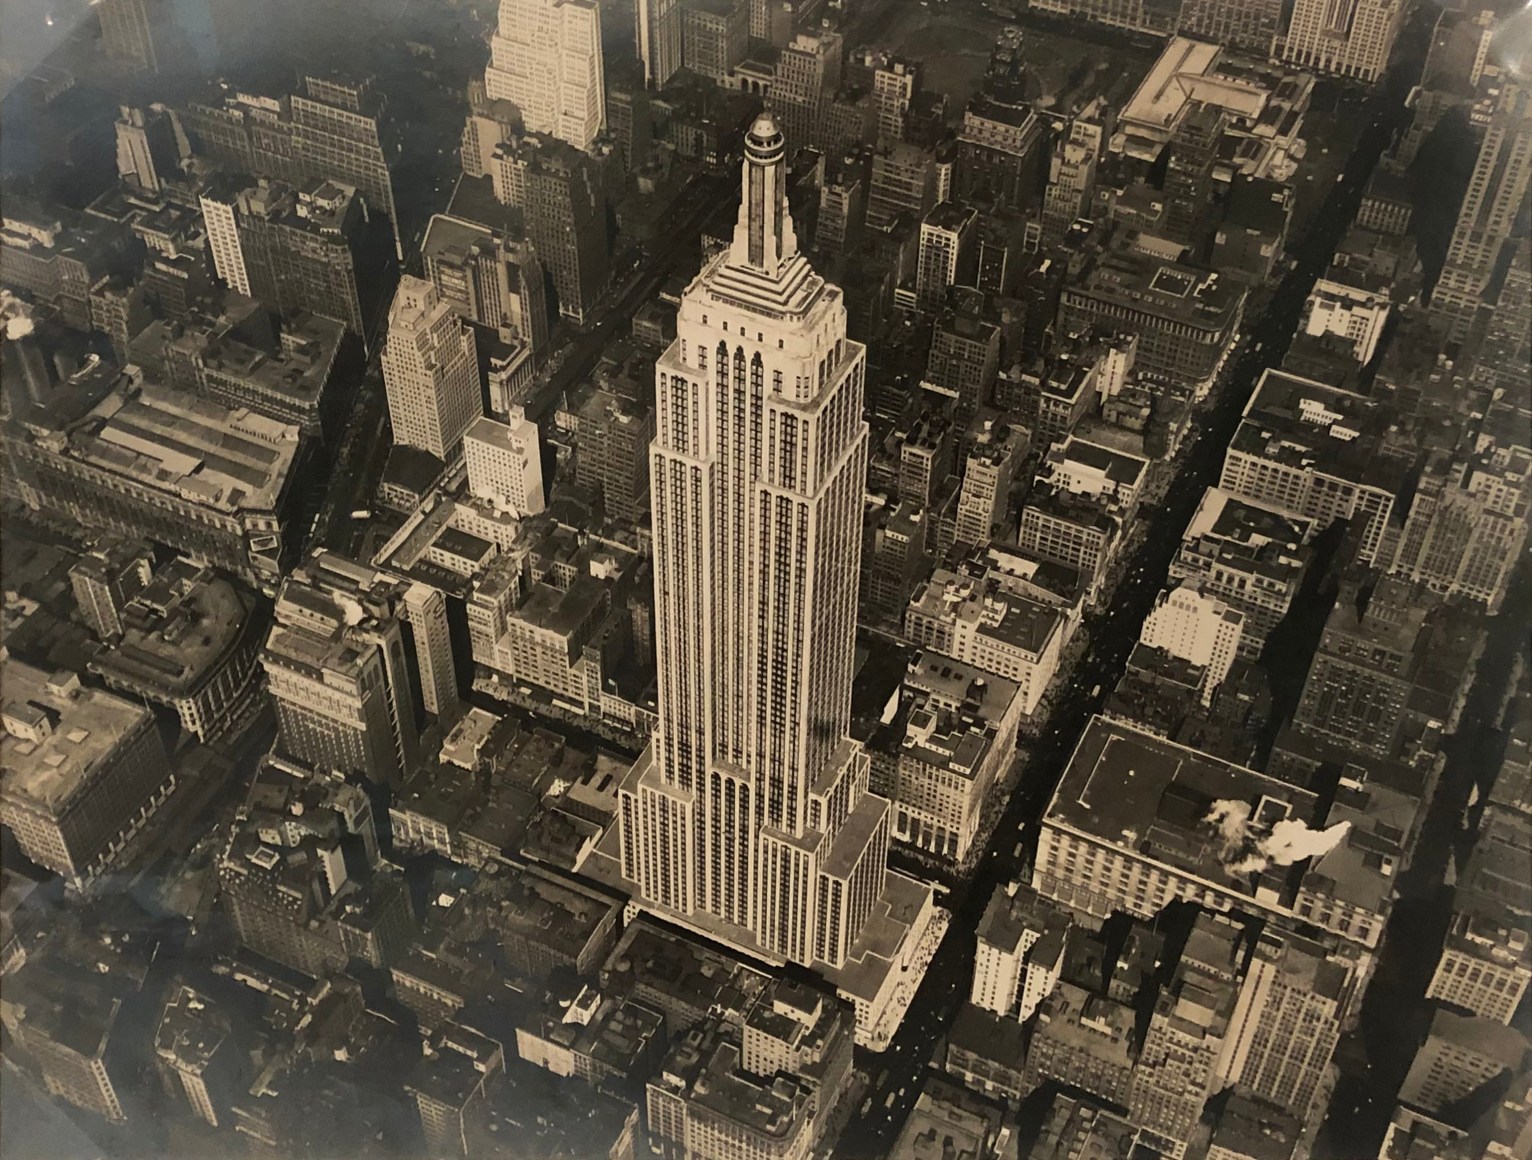 23. Fairchild Aerial Surveys, Empire State Building, ​1931. Aerial view of the completed Empire State Building from above and to the right. The building occupies the center of the frame.